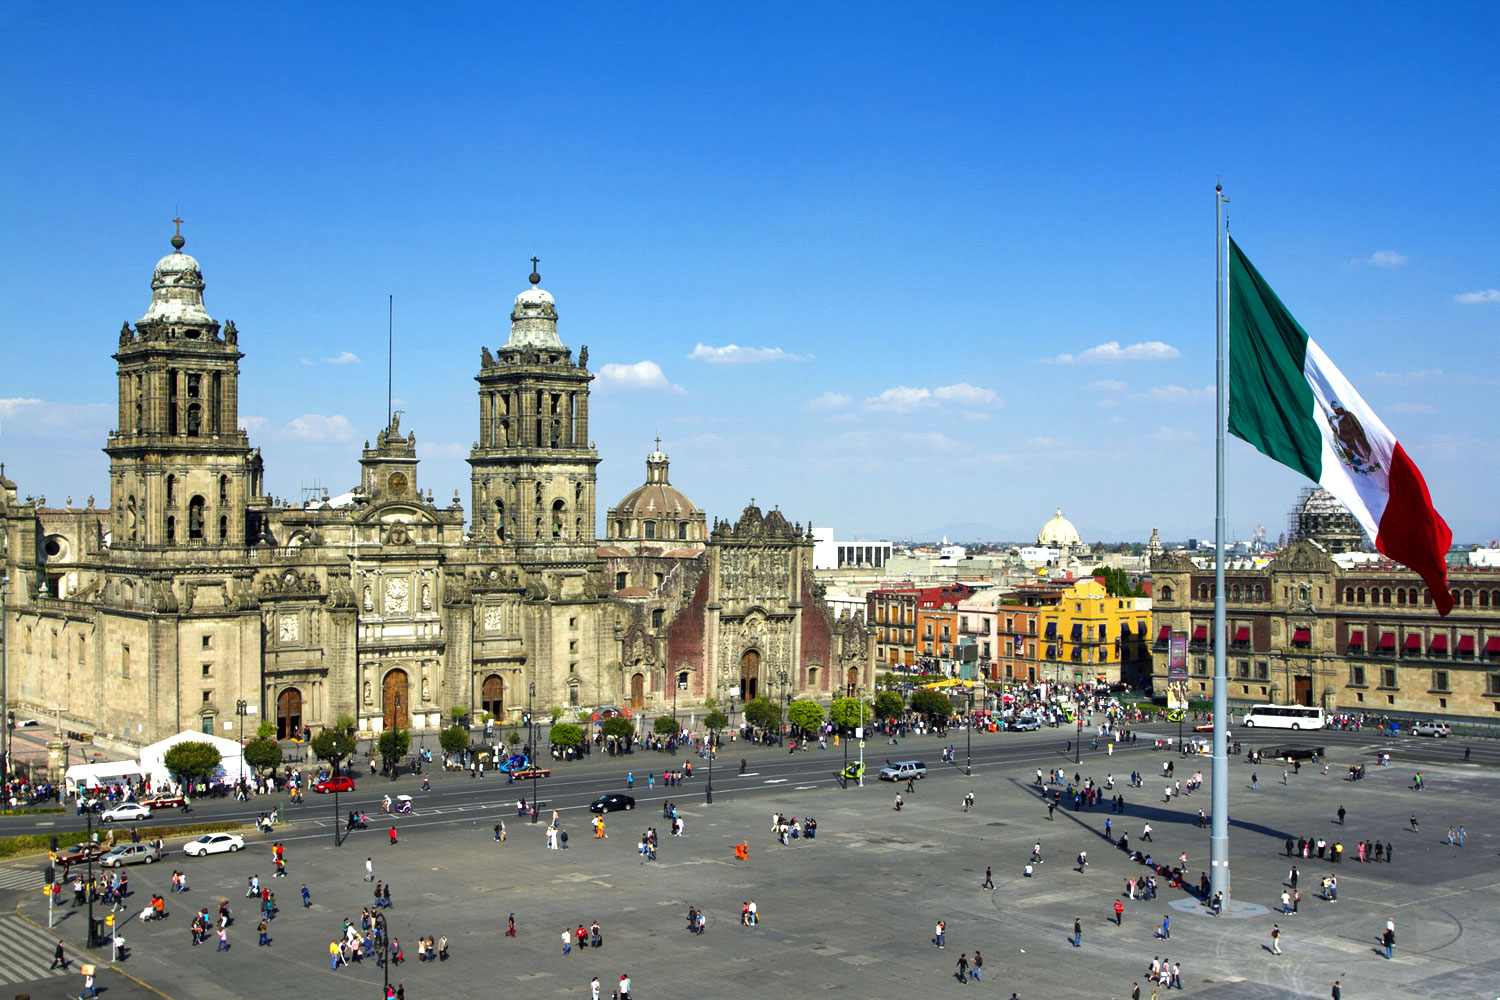 The Ultimate 13 day Mexico and Guatemala Multi-Day Tour 